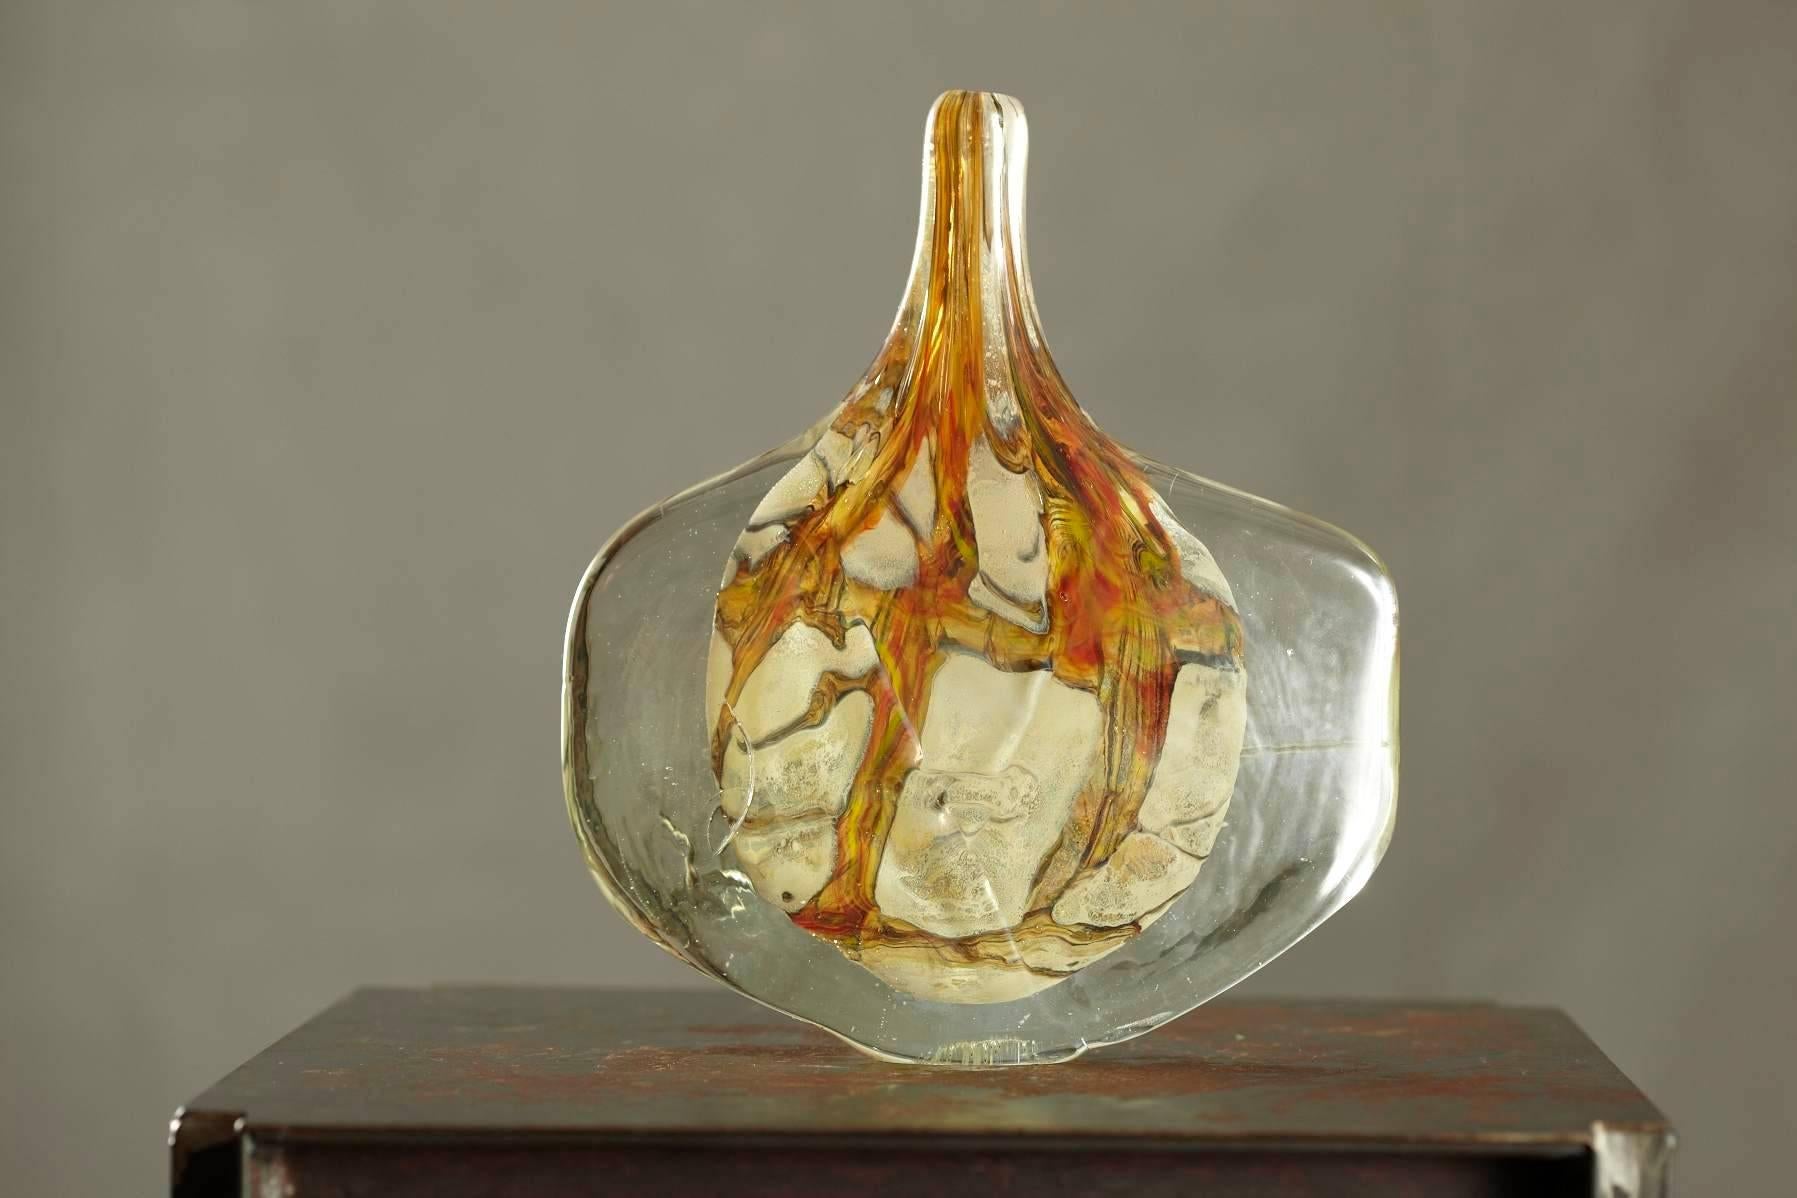 Beautiful free-form handcrafted, blown art glass vase in warm tones of green, beige, brown by Michael Harris for Mdina Glass, Malta.

Michael Harris (1933-1994), was an English glassworker.
With his wife Elizabeth, he set up Mdina glass on the